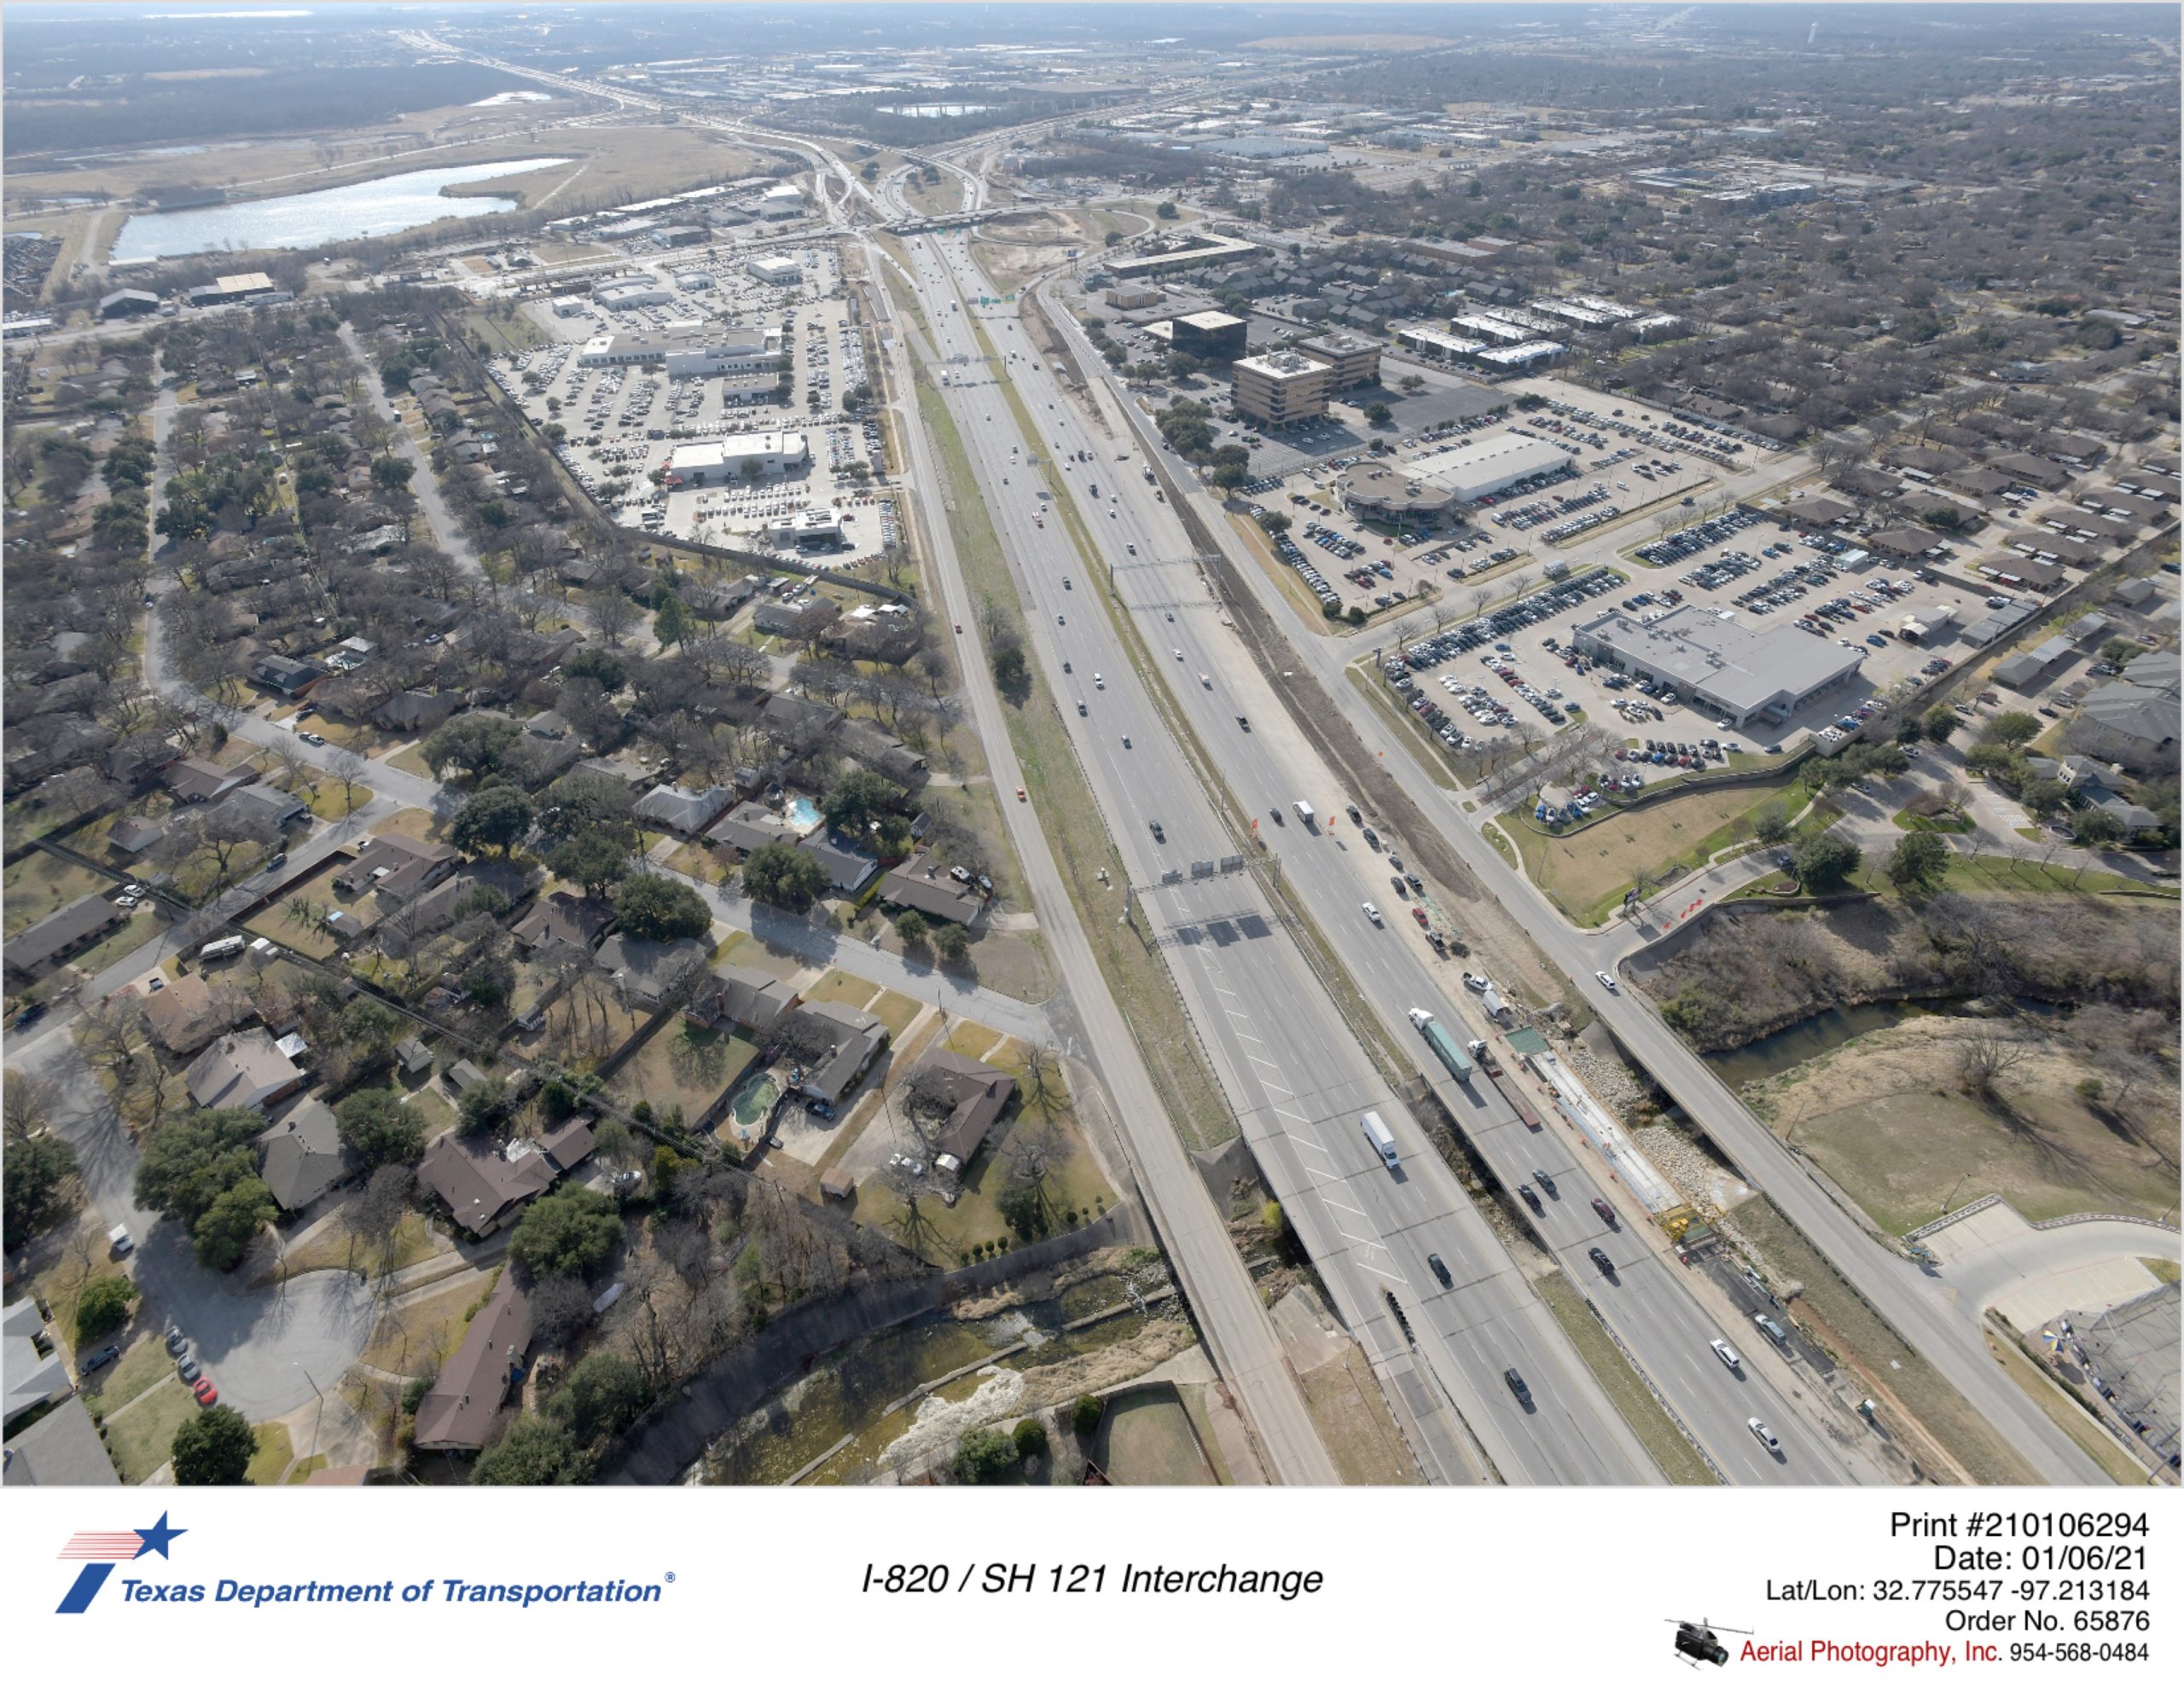 I-820 looking south over Calloway Branch. Construction of new I-820 southbound mainlane bridge over Calloway Branch is shown.